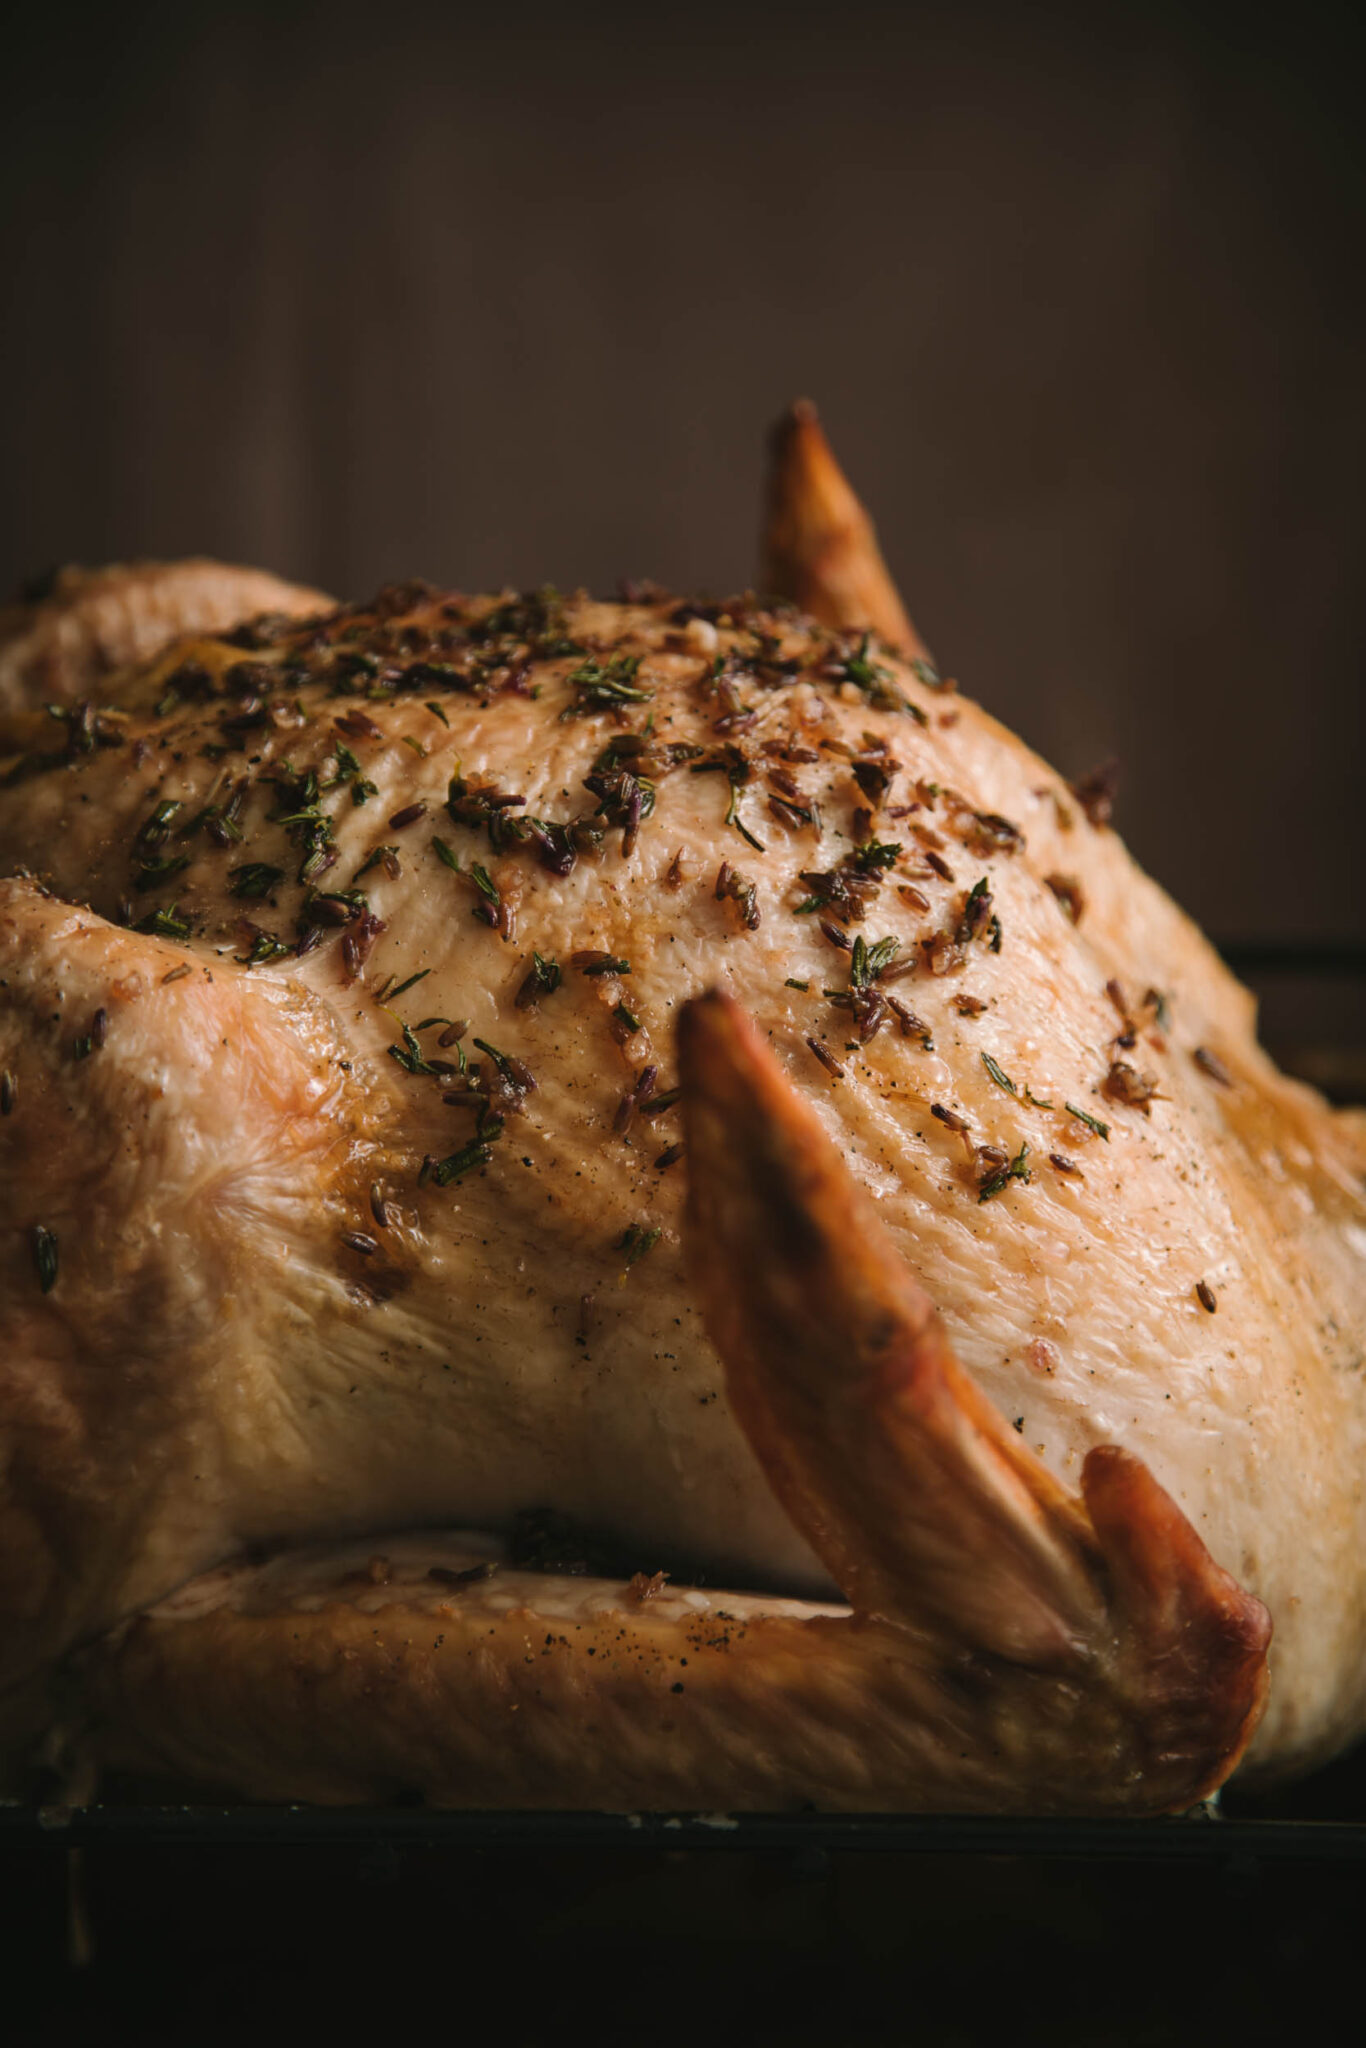 Close up view of a roasted turkey with herbs.